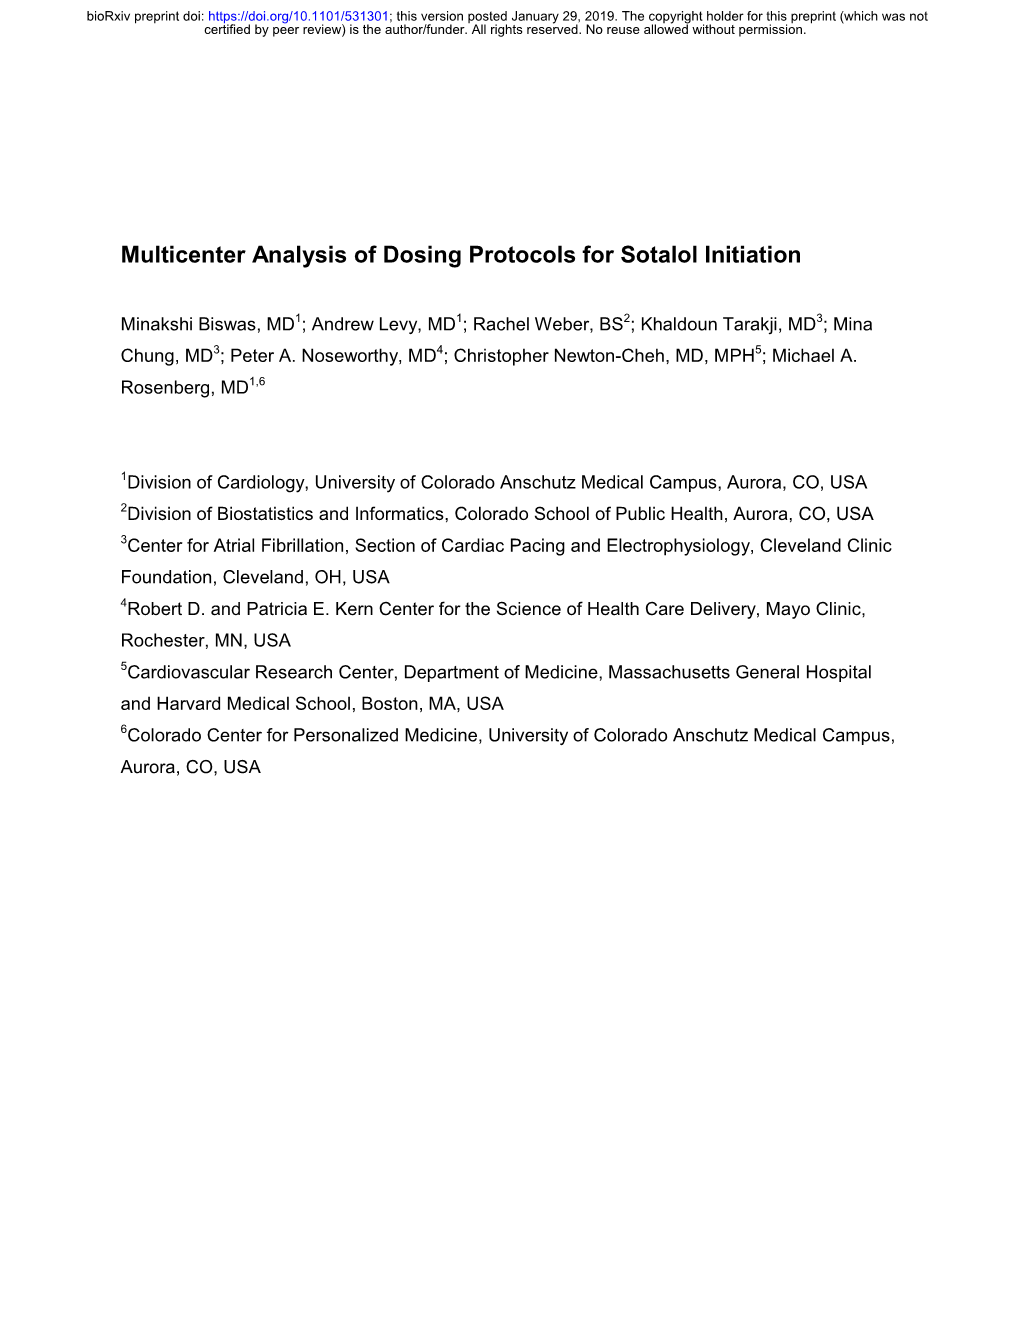 Multicenter Analysis of Dosing Protocols for Sotalol Initiation